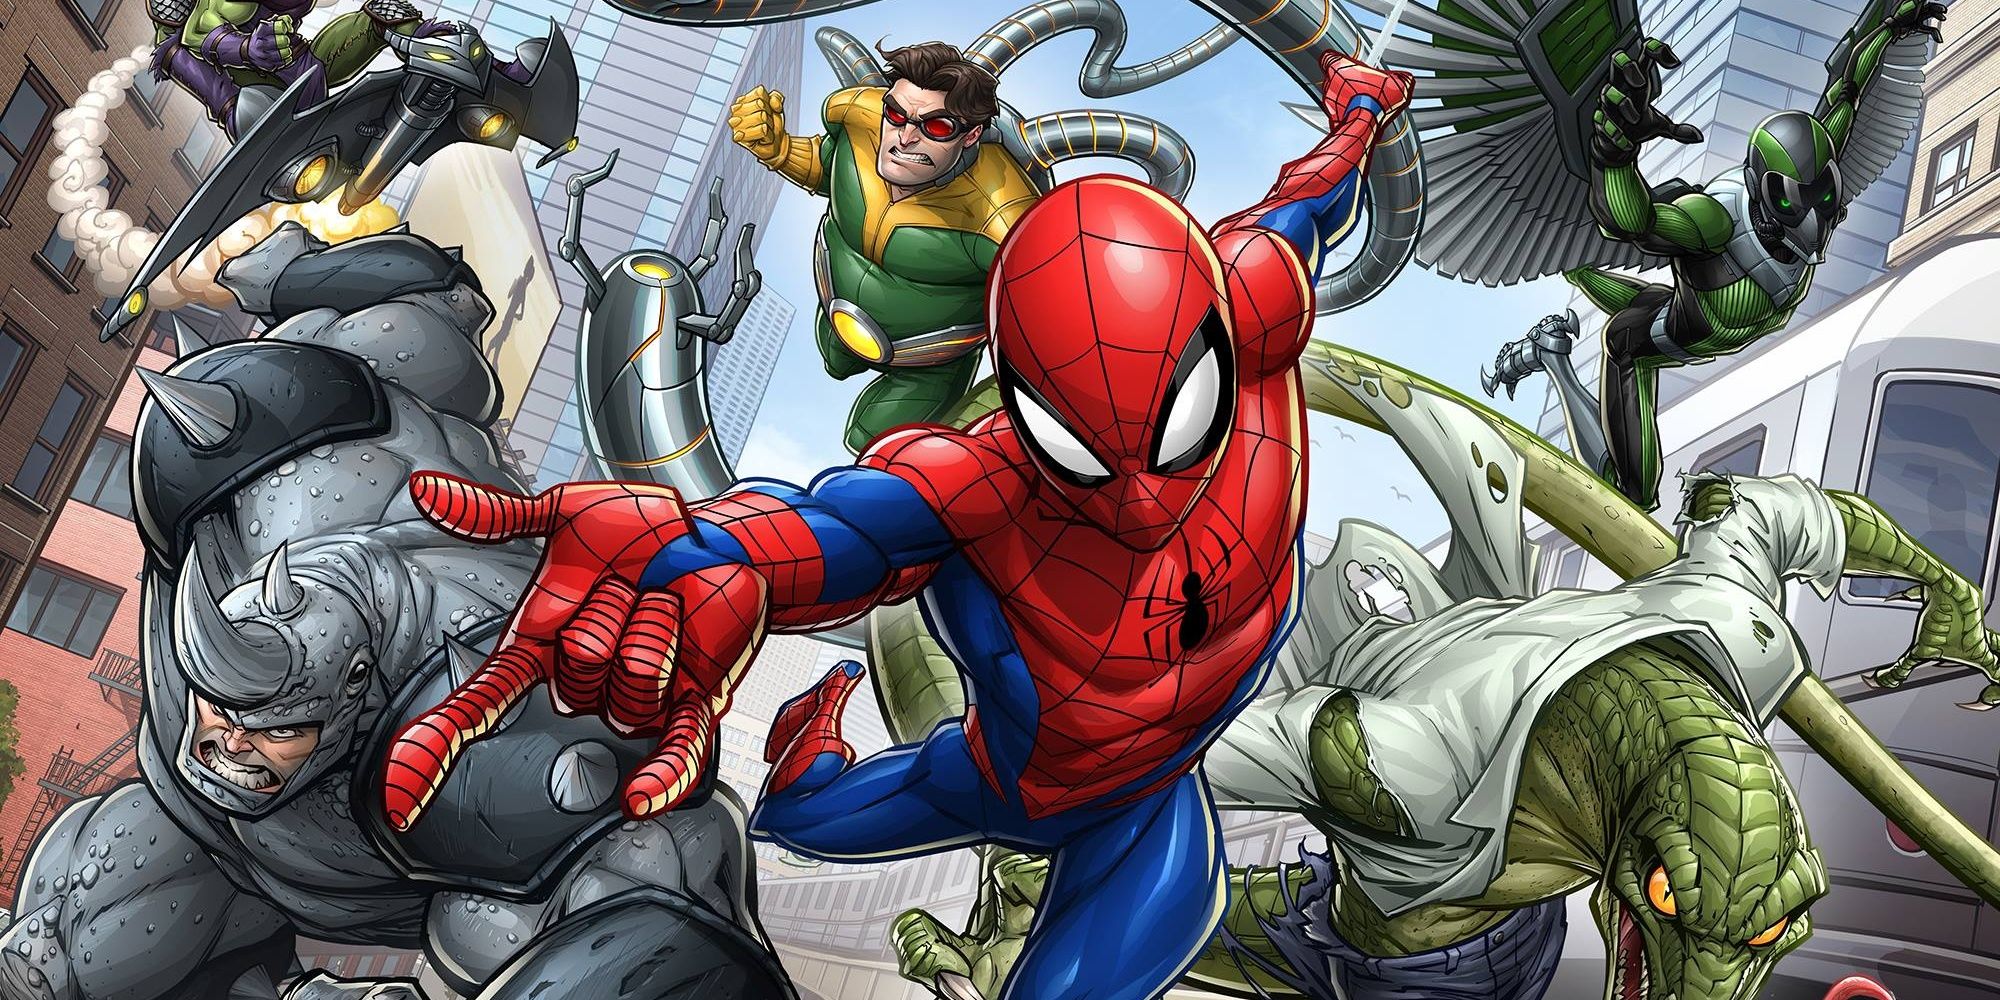 Spider-Man Animated Series Promo Art Teases Rogues Gallery